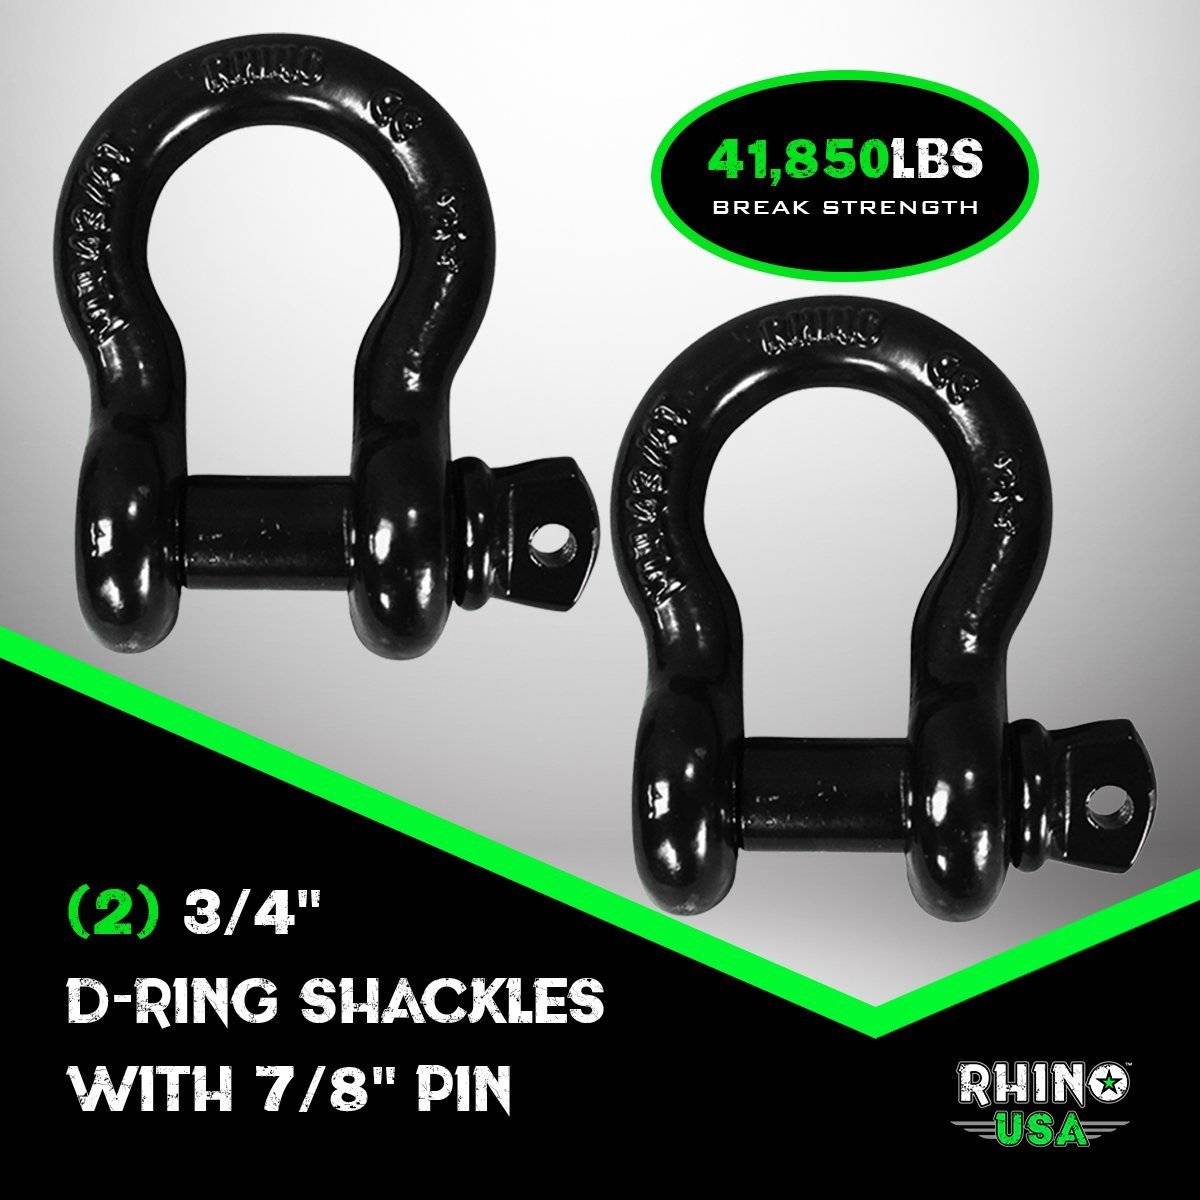 30' Tow Strap & D-Ring Shackle Set Combo Recovery Rhino USA, Inc. 